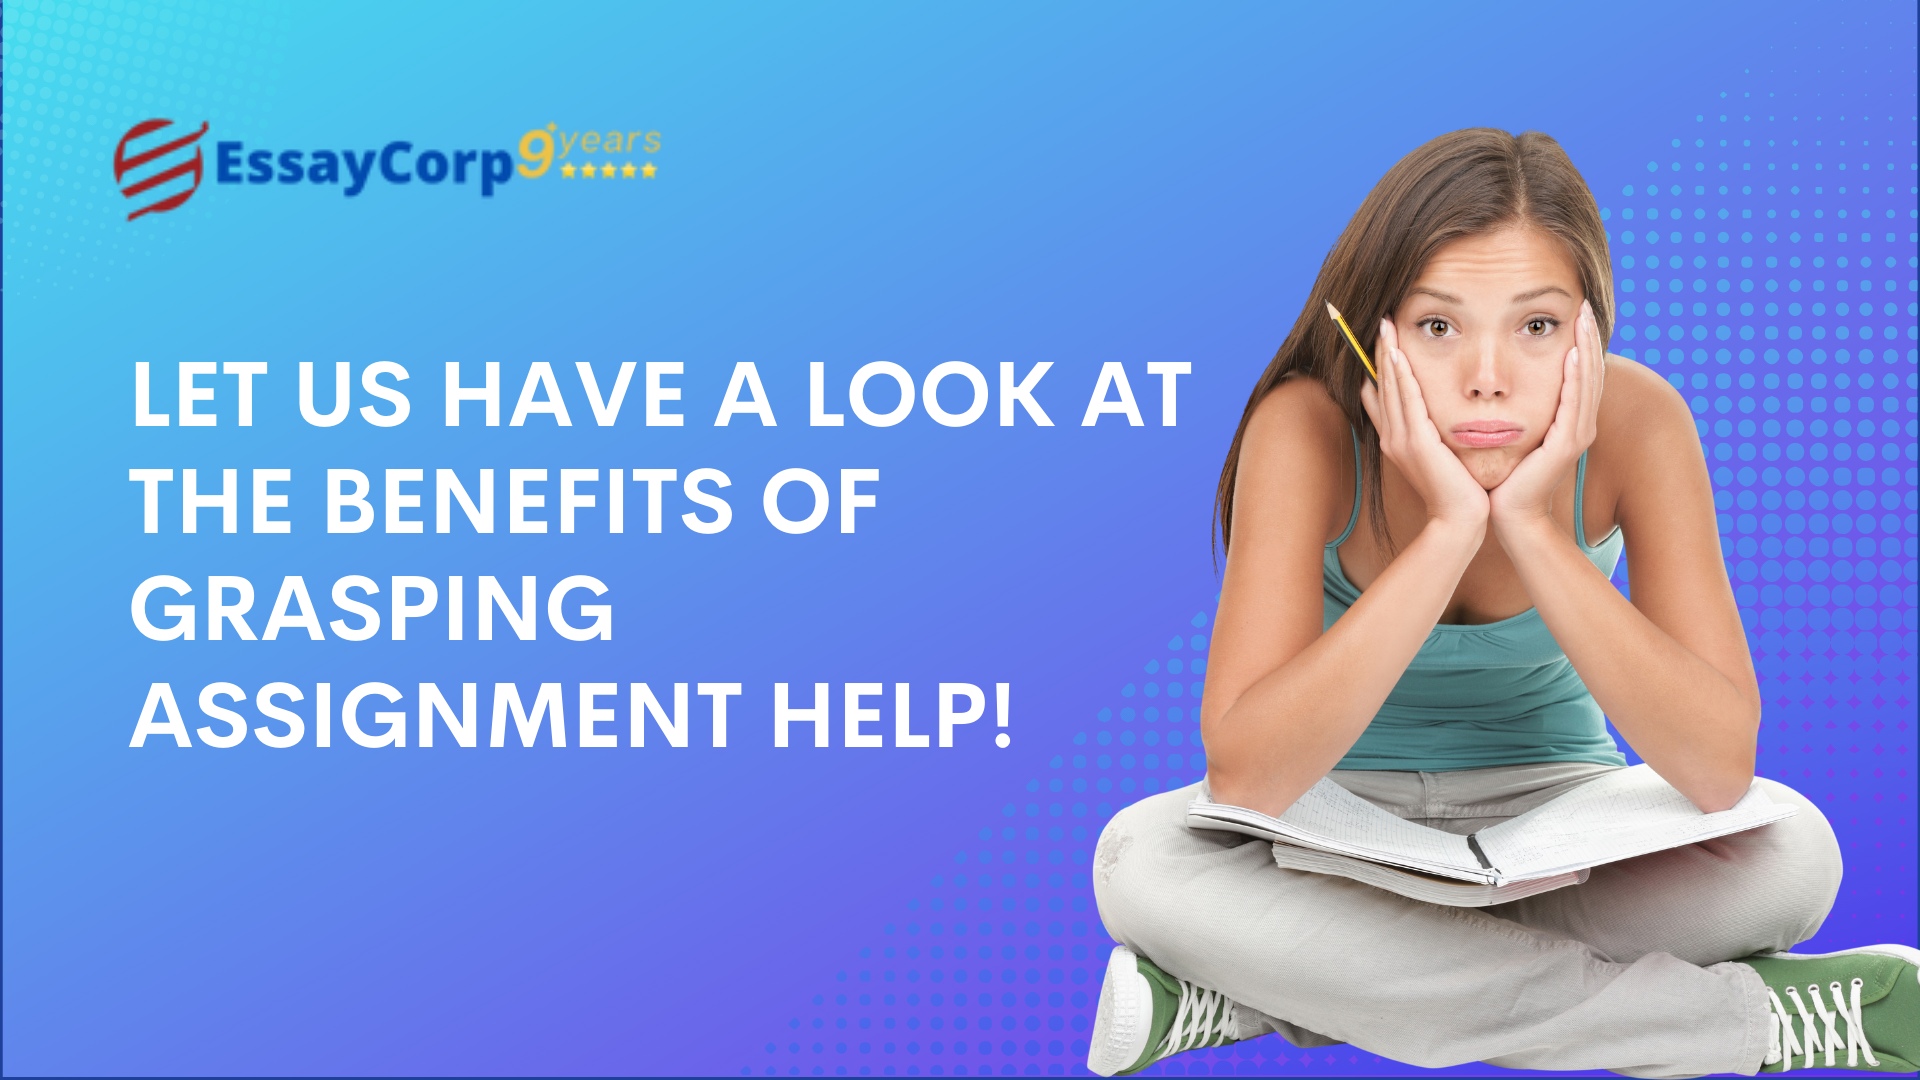 Let us Have a Look At the Benefits of Grasping Assignment Help!